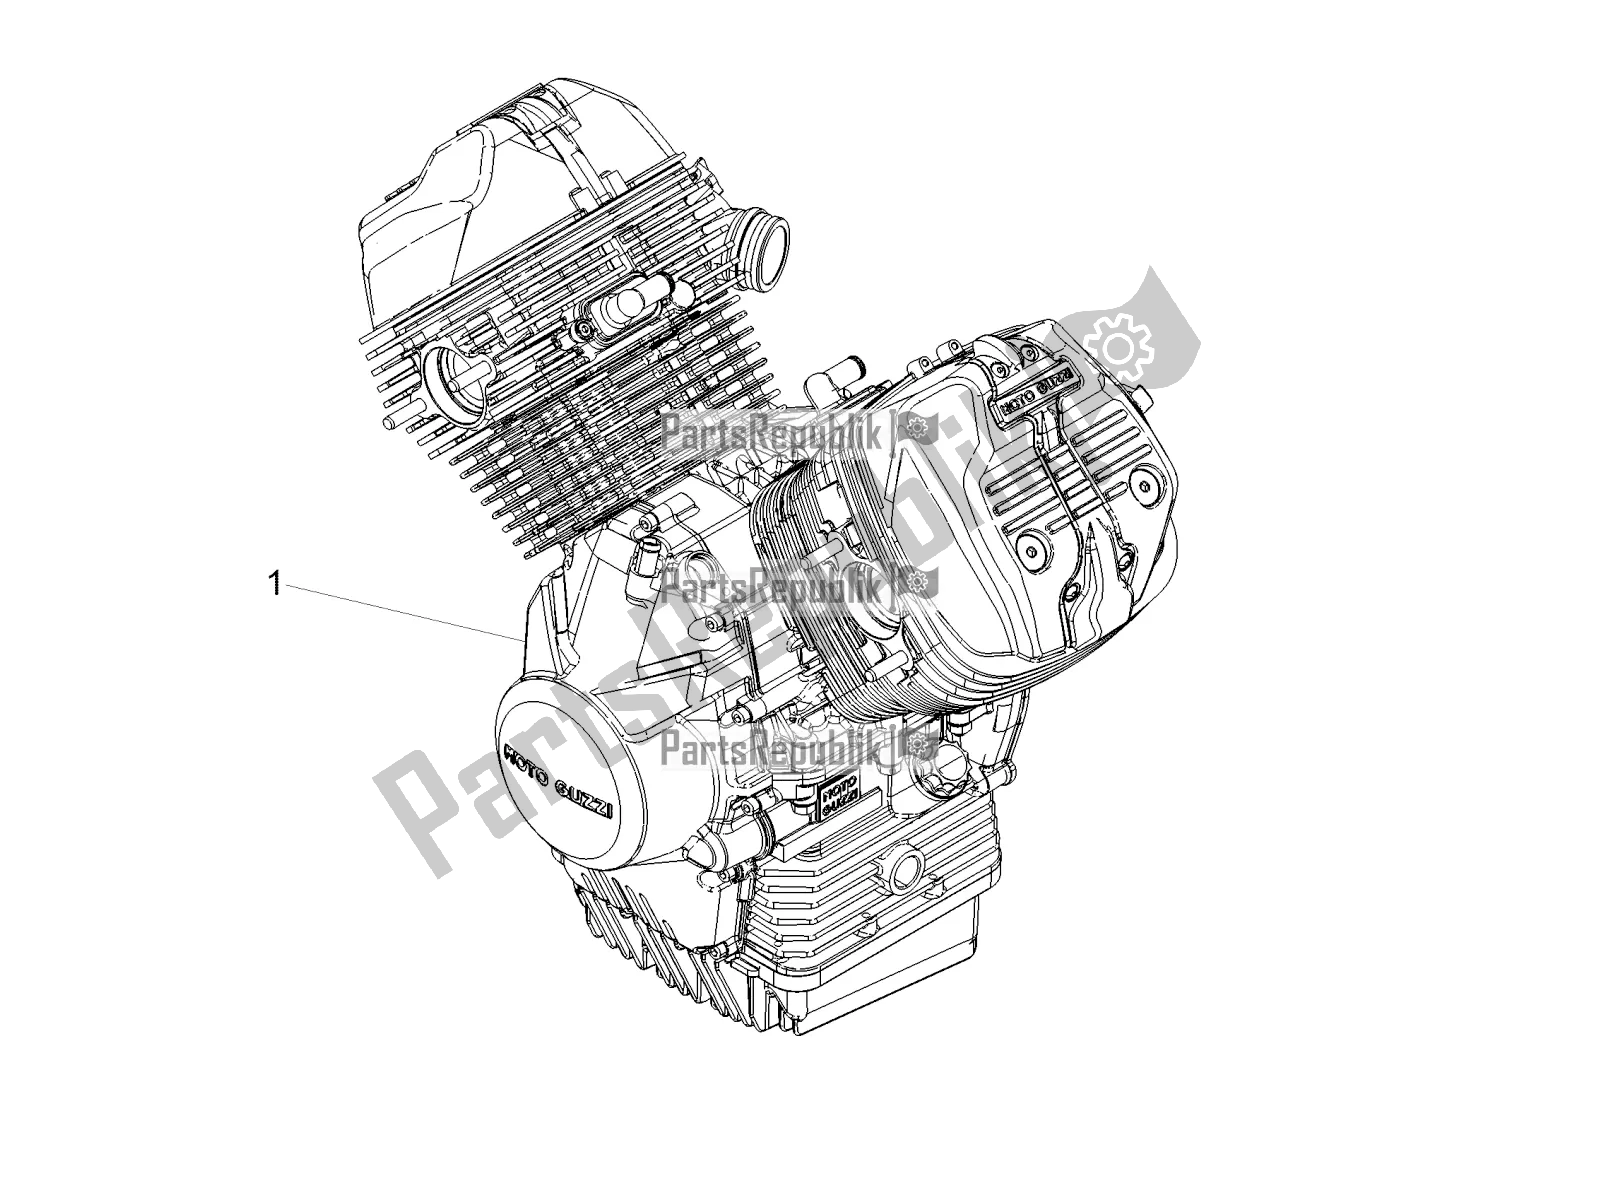 All parts for the Engine-completing Part-lever of the Moto-Guzzi V7 III Racer 750 E4 ABS 2017-2018-2019 Nafta 2019